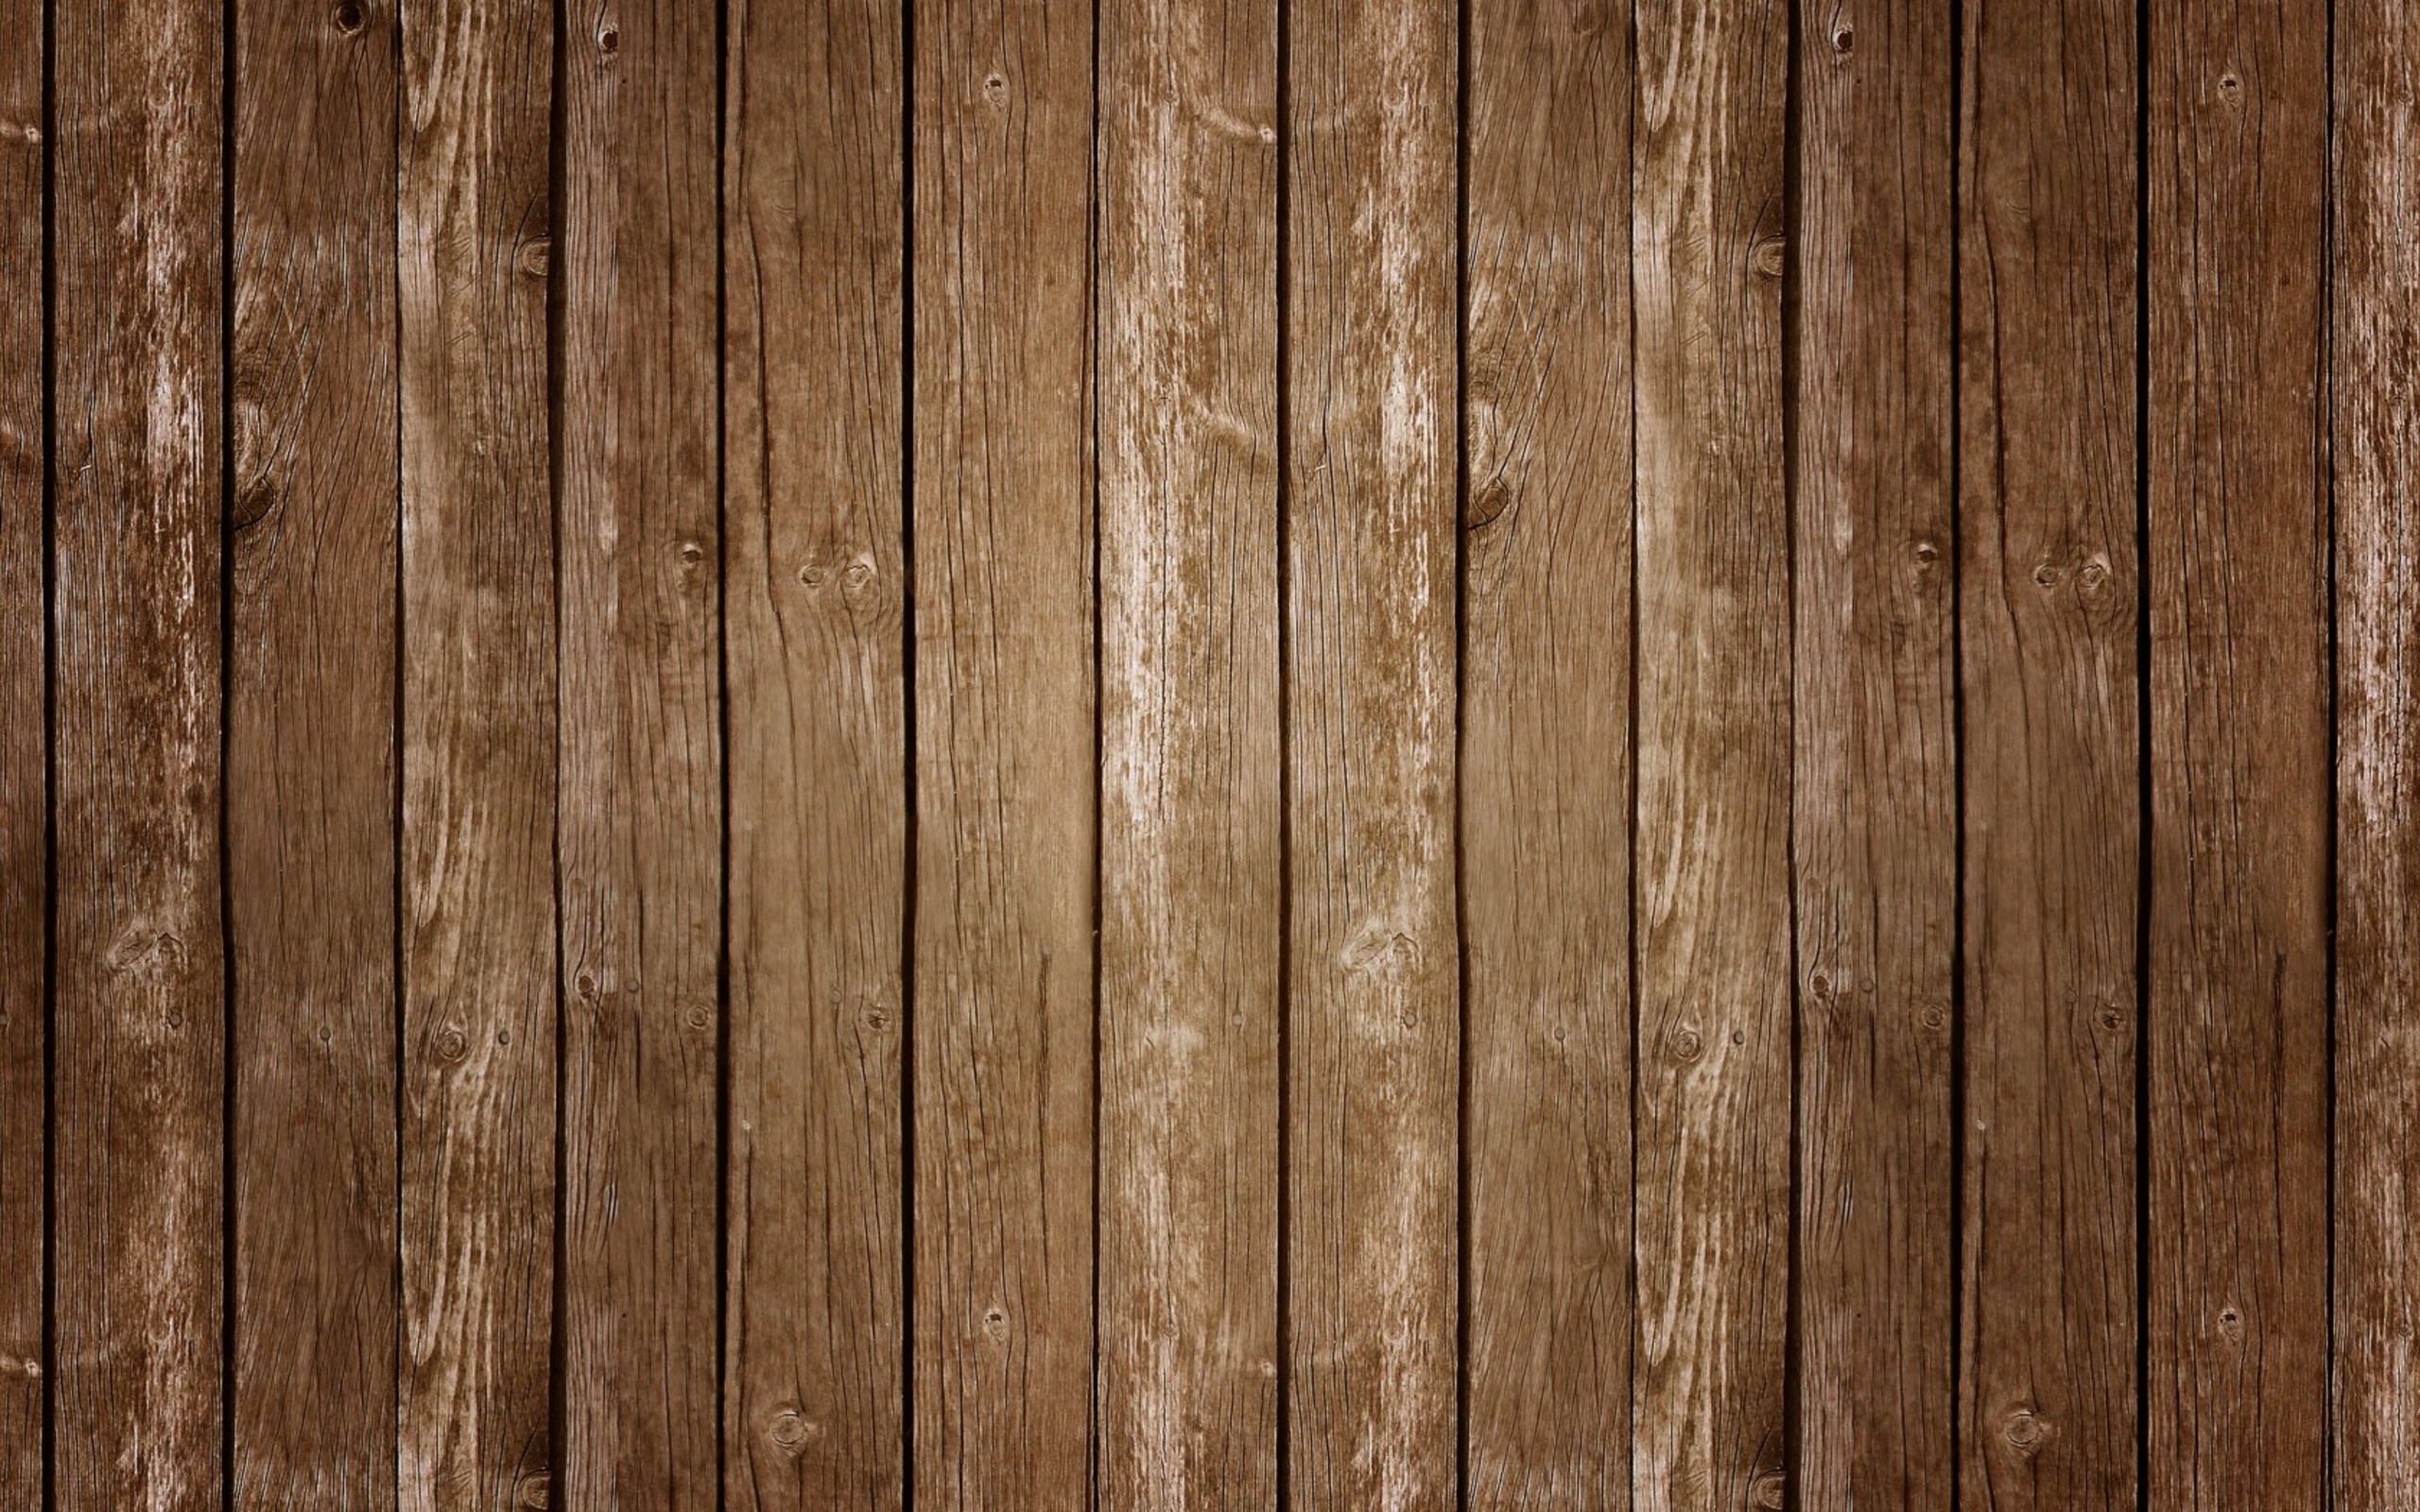 pattern, artistic, wood cell phone wallpapers